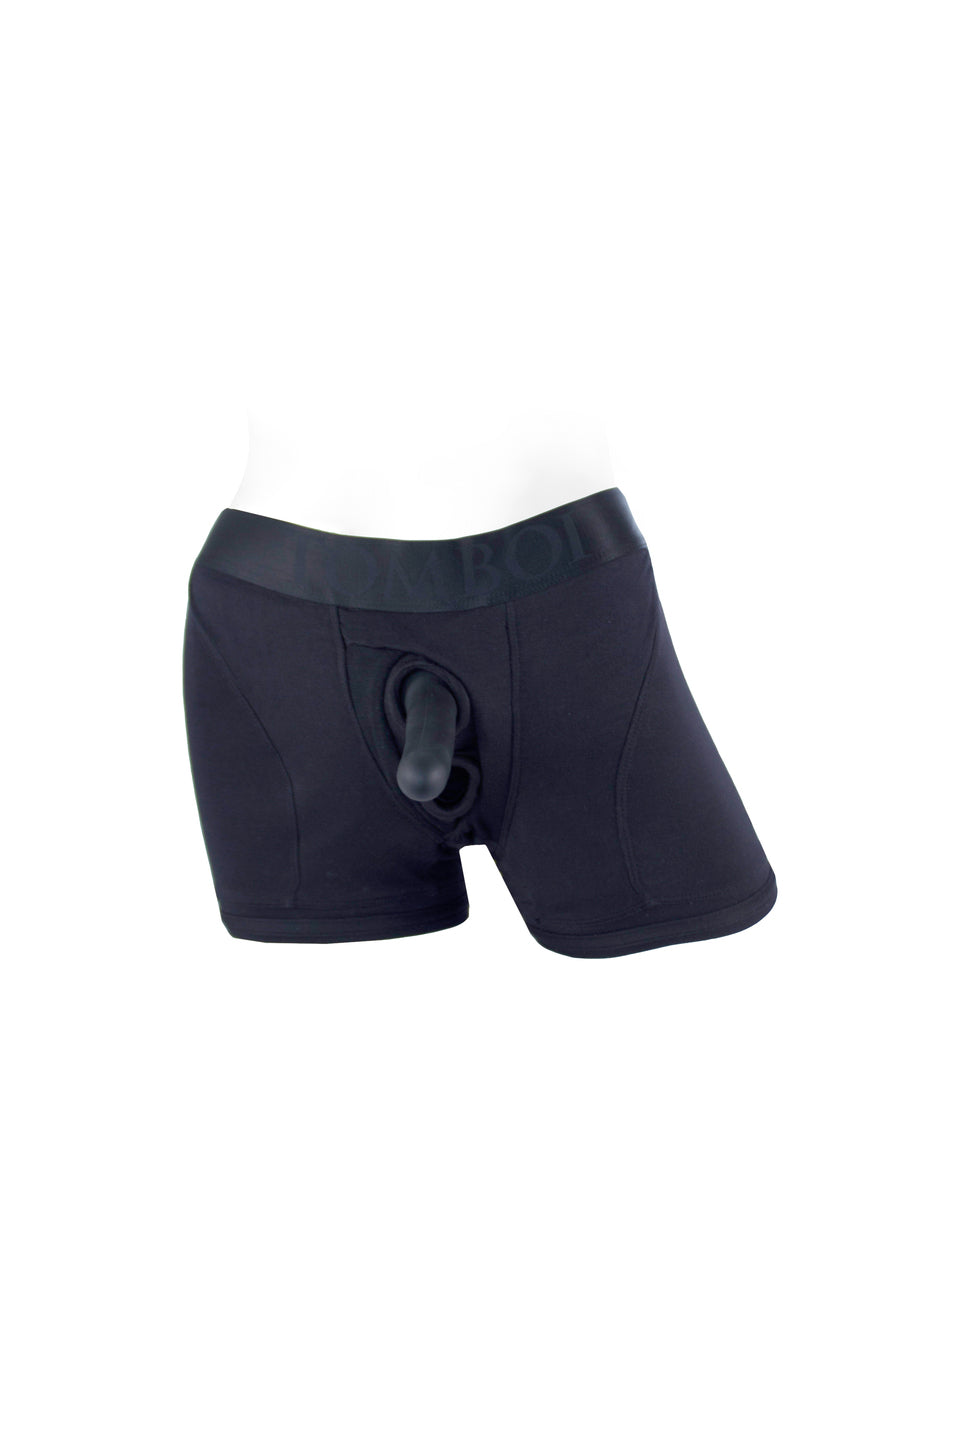 The front of the black Tomboii Boxer Brief Harness with a dildo inserted.